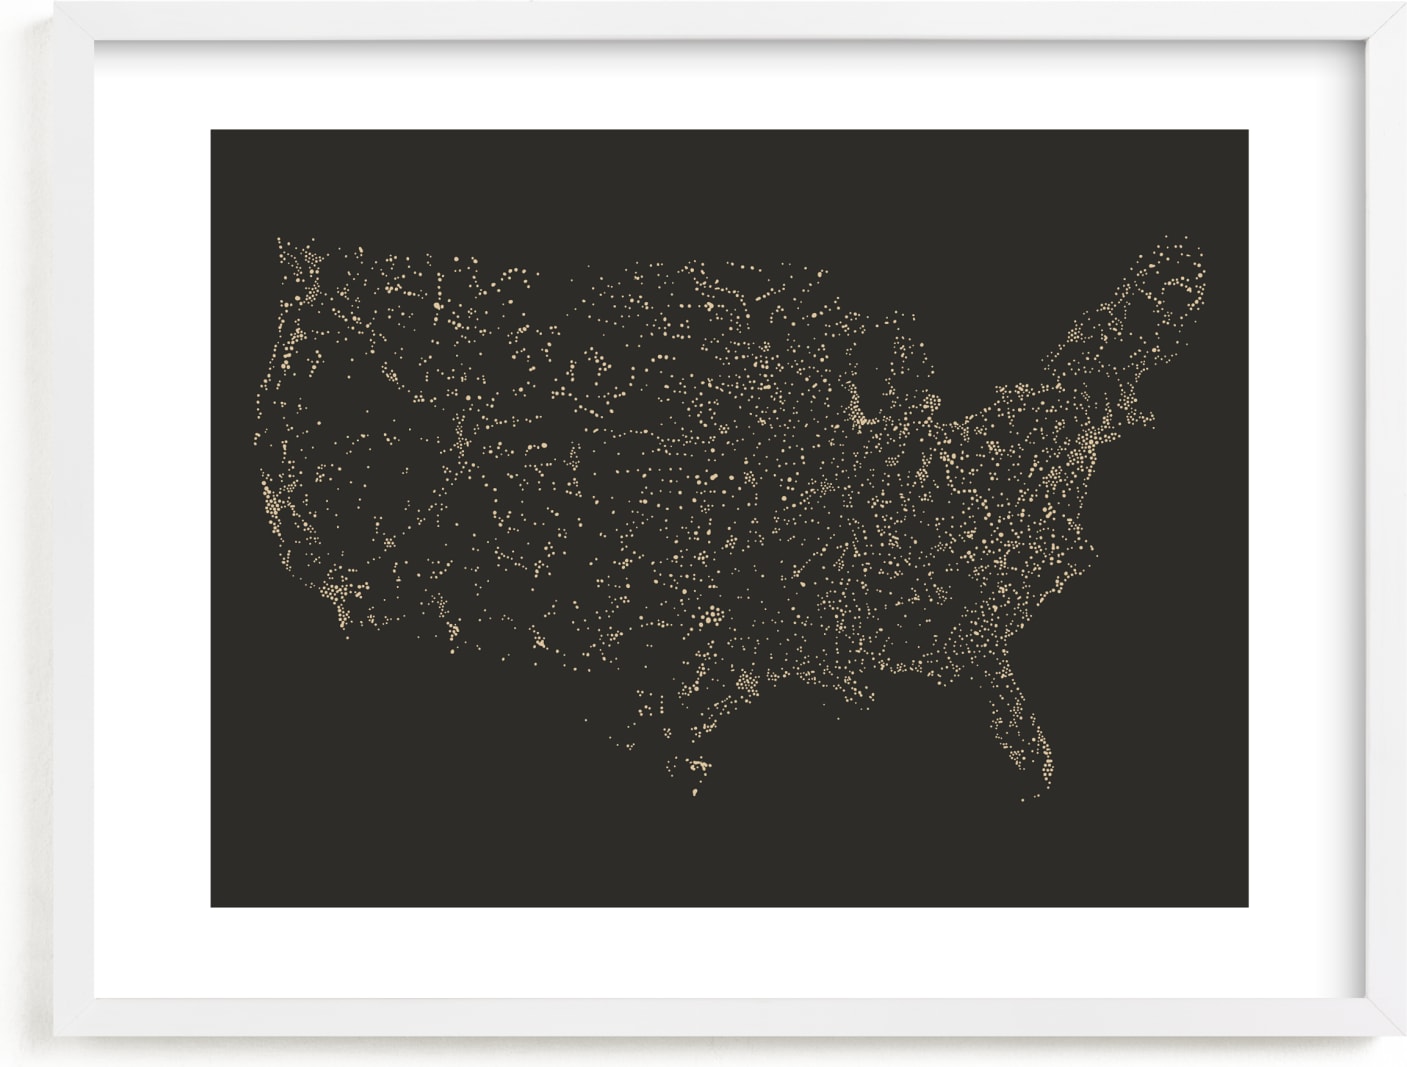 This is a black art by Jessie Steury called USA Night Sky Map.